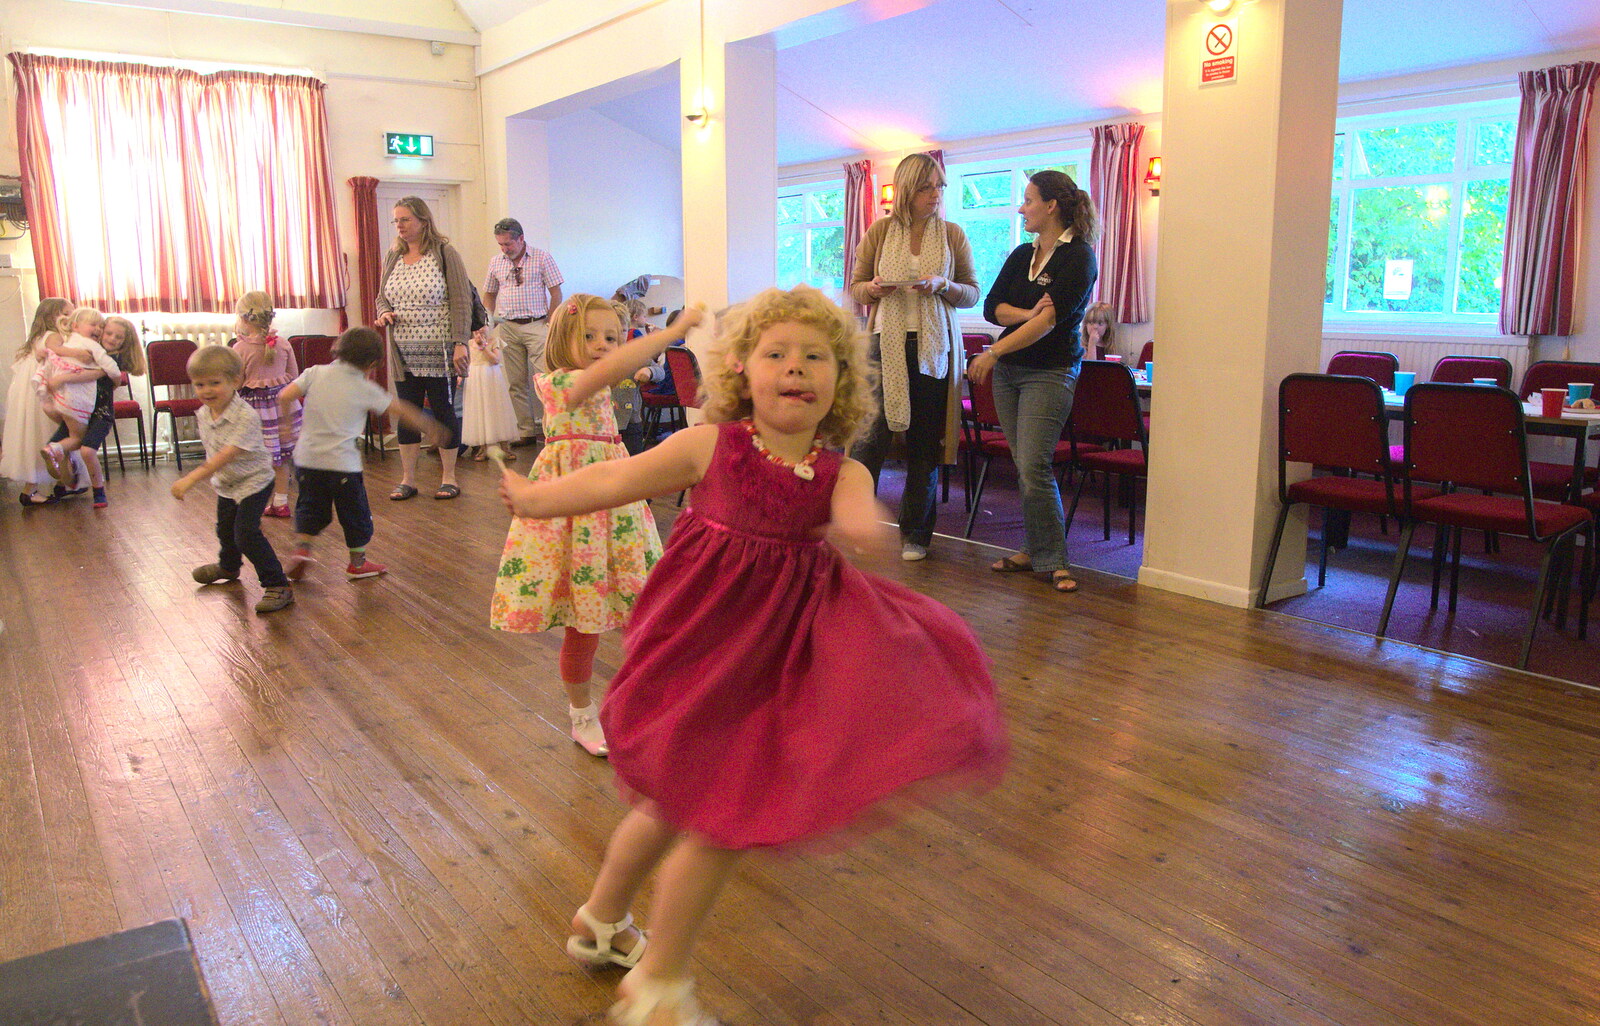 Rosie dances around from Fred's Fifth Birthday, The Village Hall, Brome, Suffolk - 28th September 2013